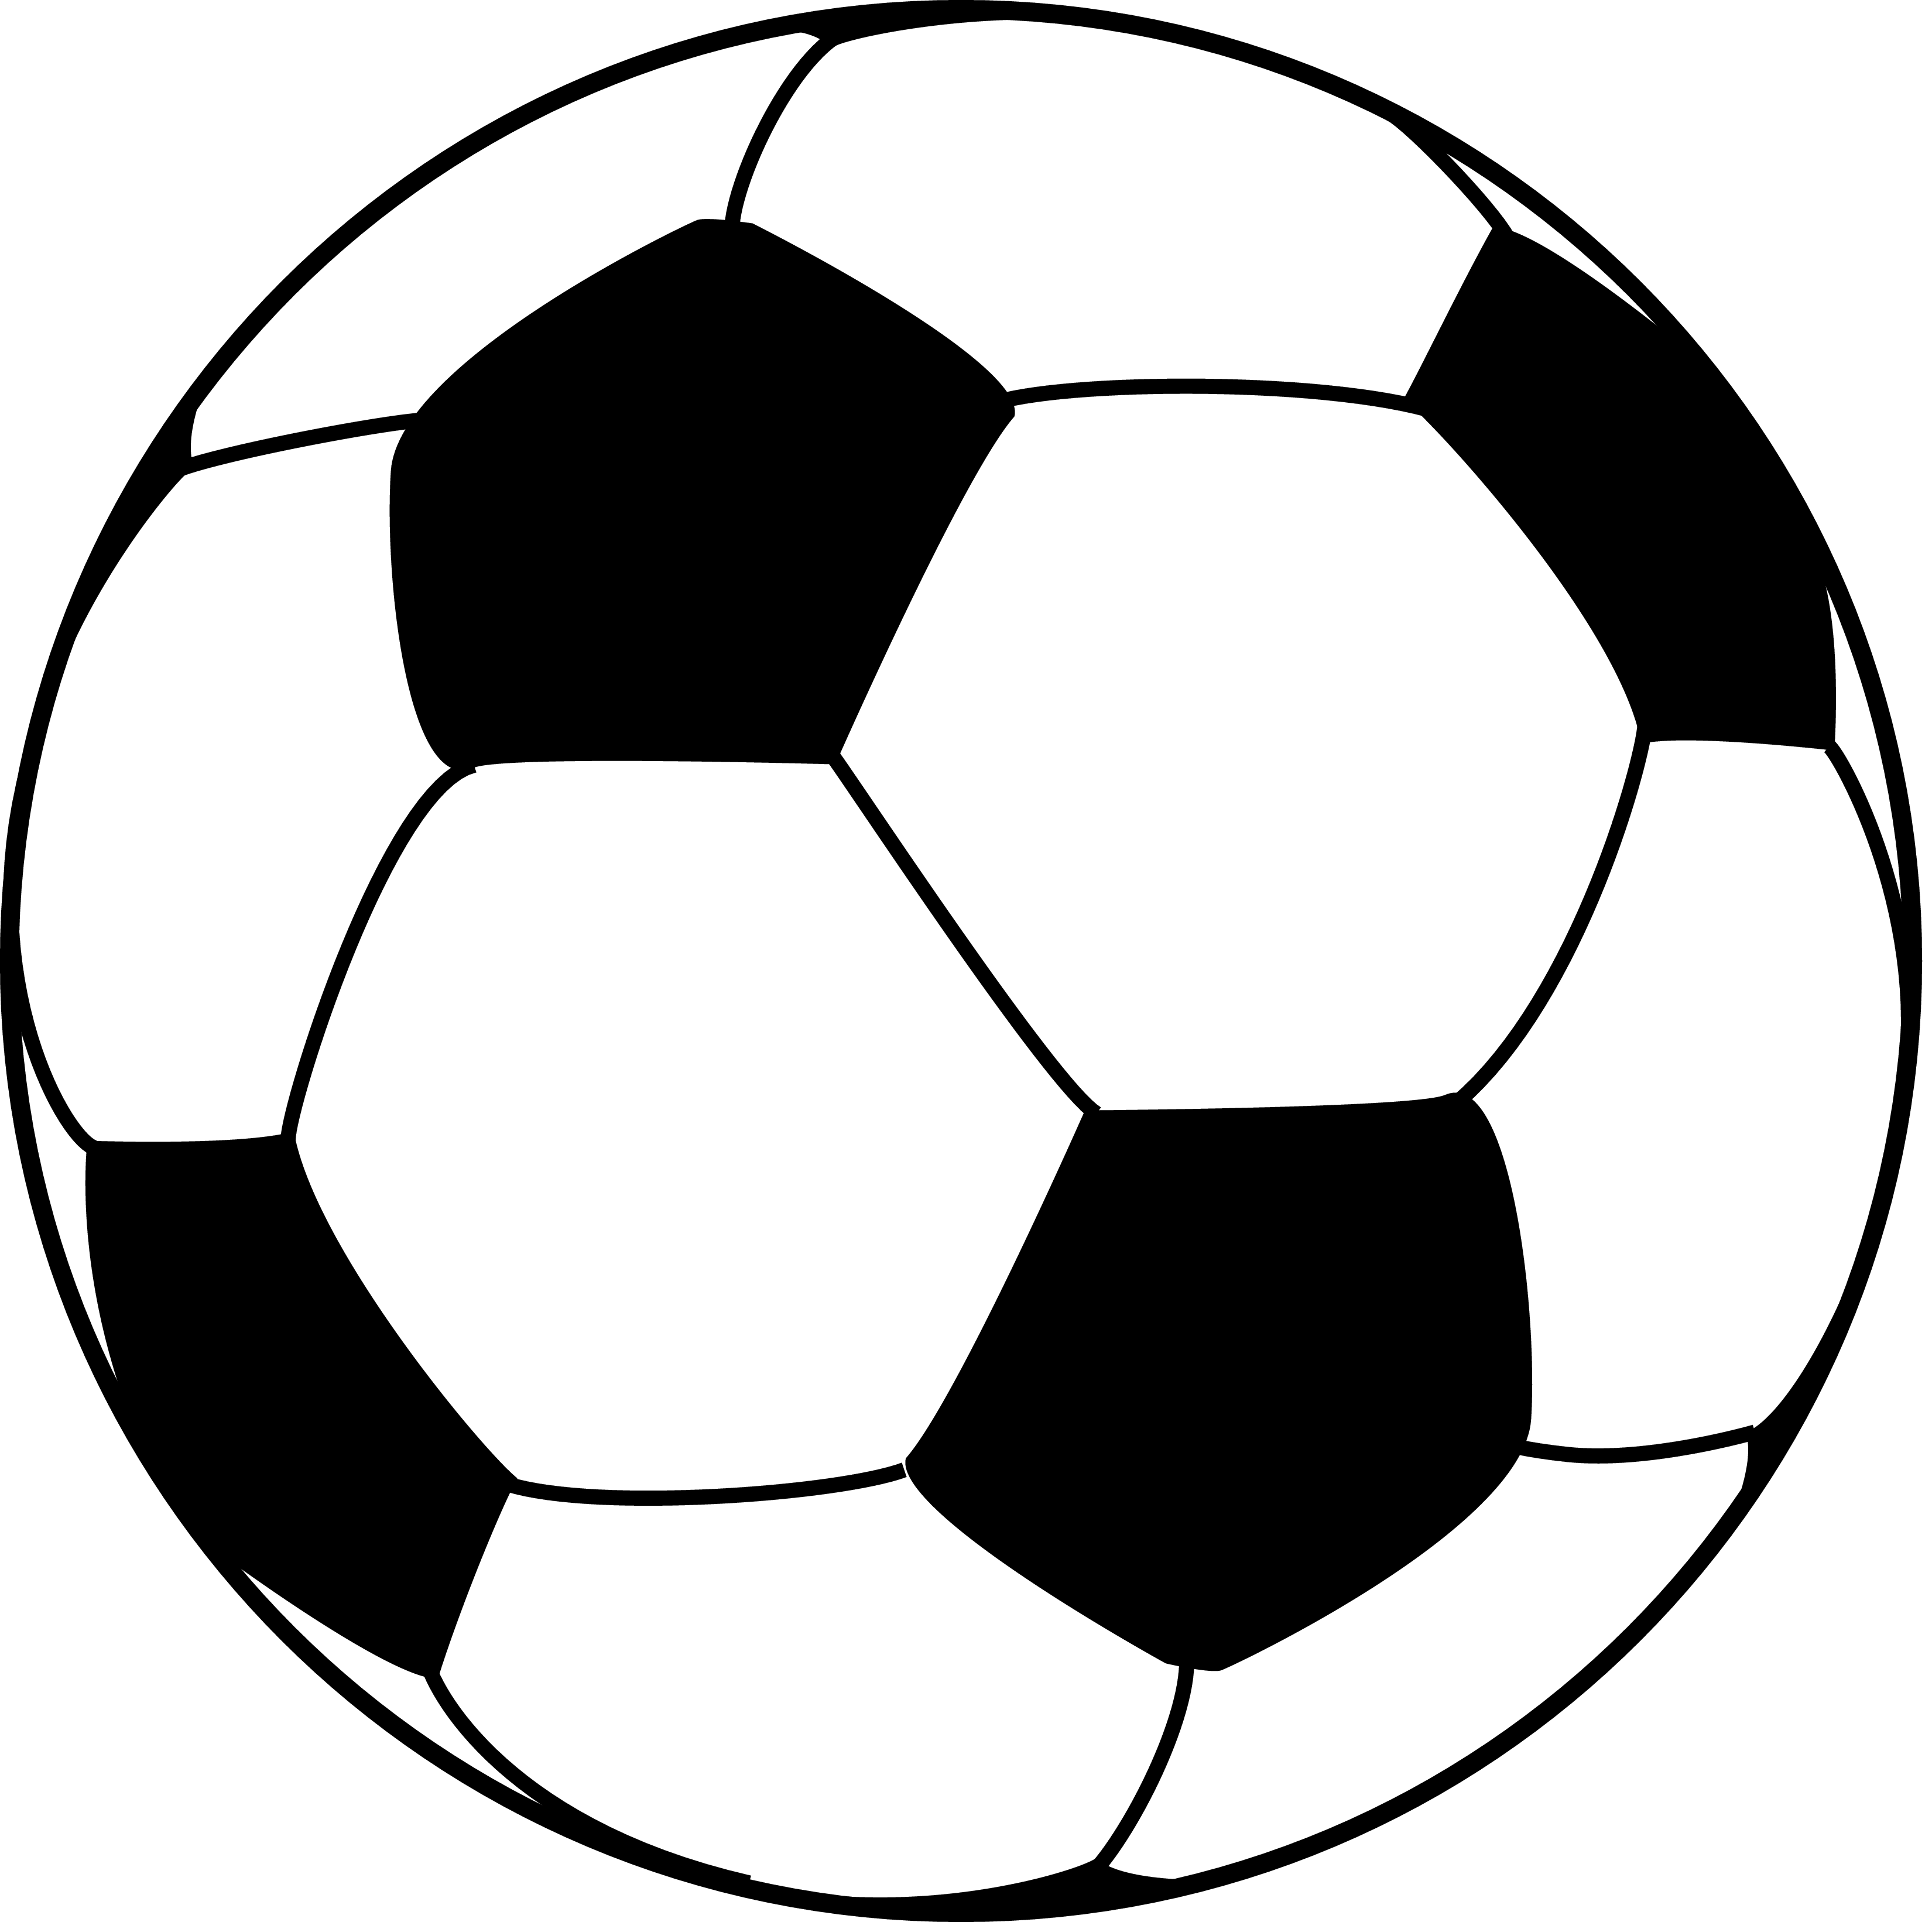 Son clipart ball. Soccer drawing easy at